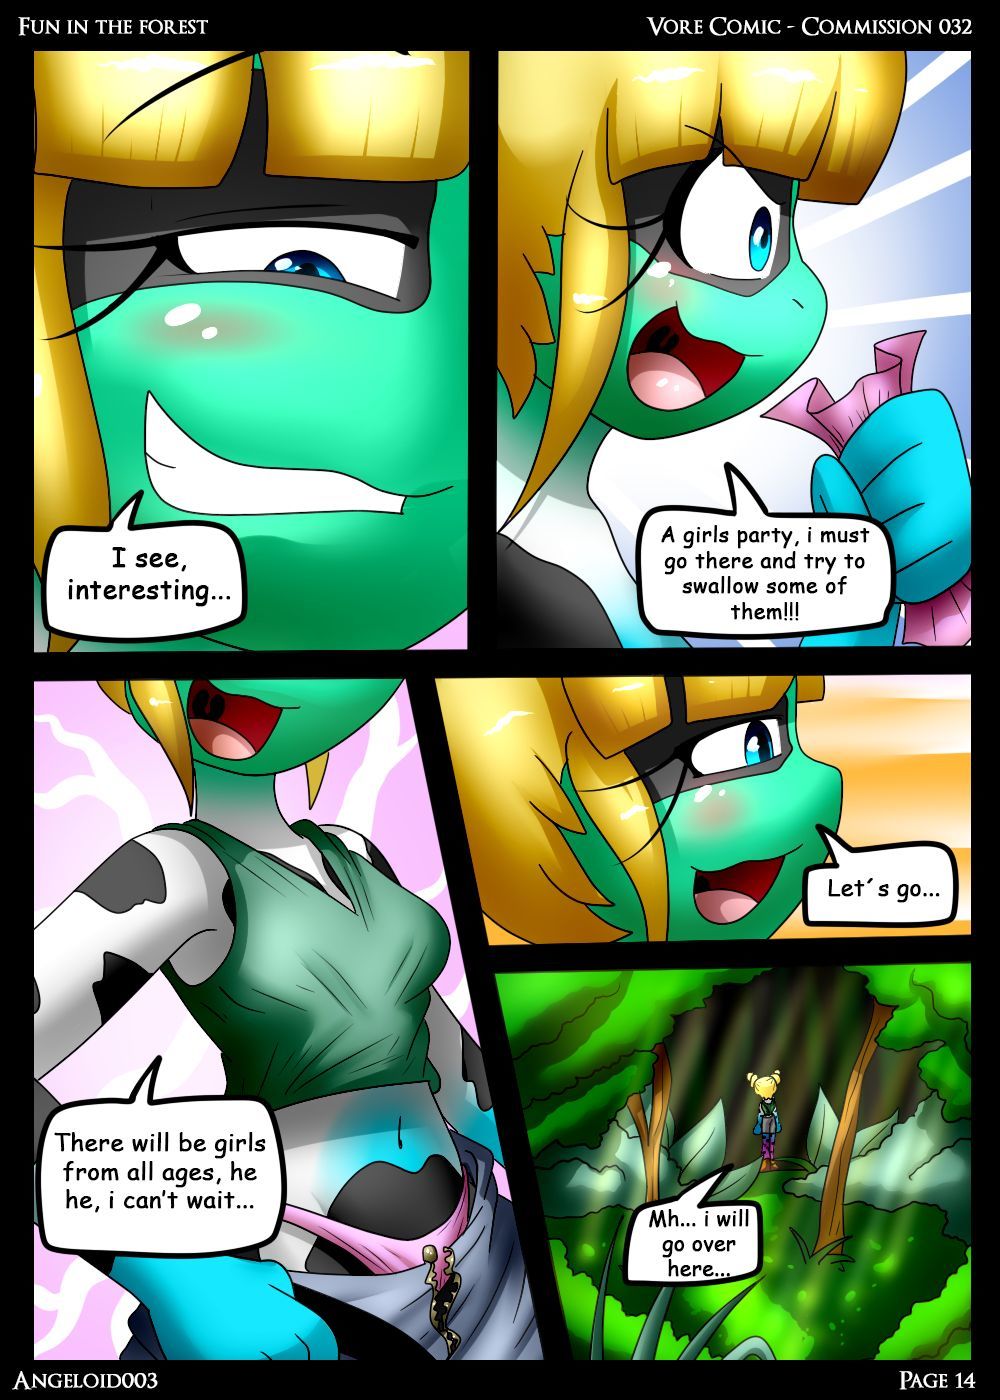 Fun in the Forest - Comm032 Angeloid003 page 14